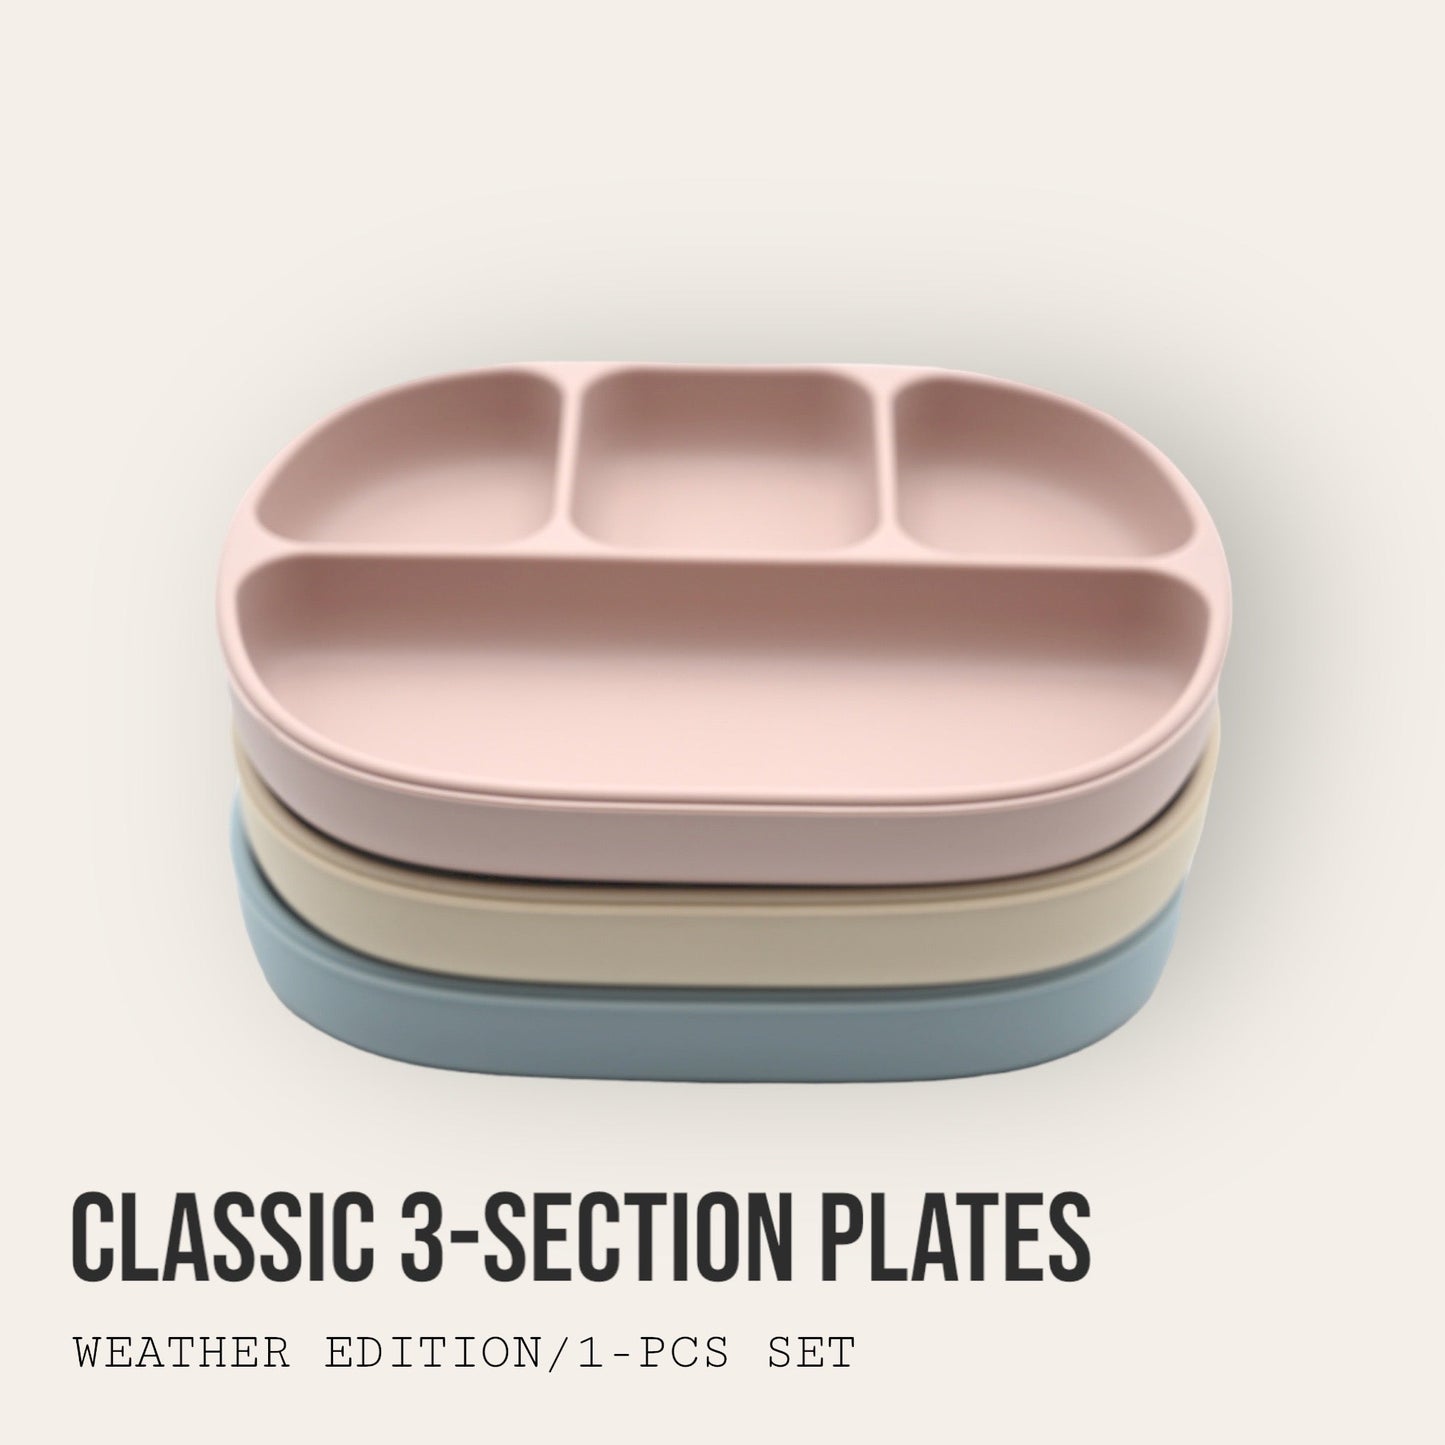 Platinum Silicone Sectioned Suction Plate - milktop